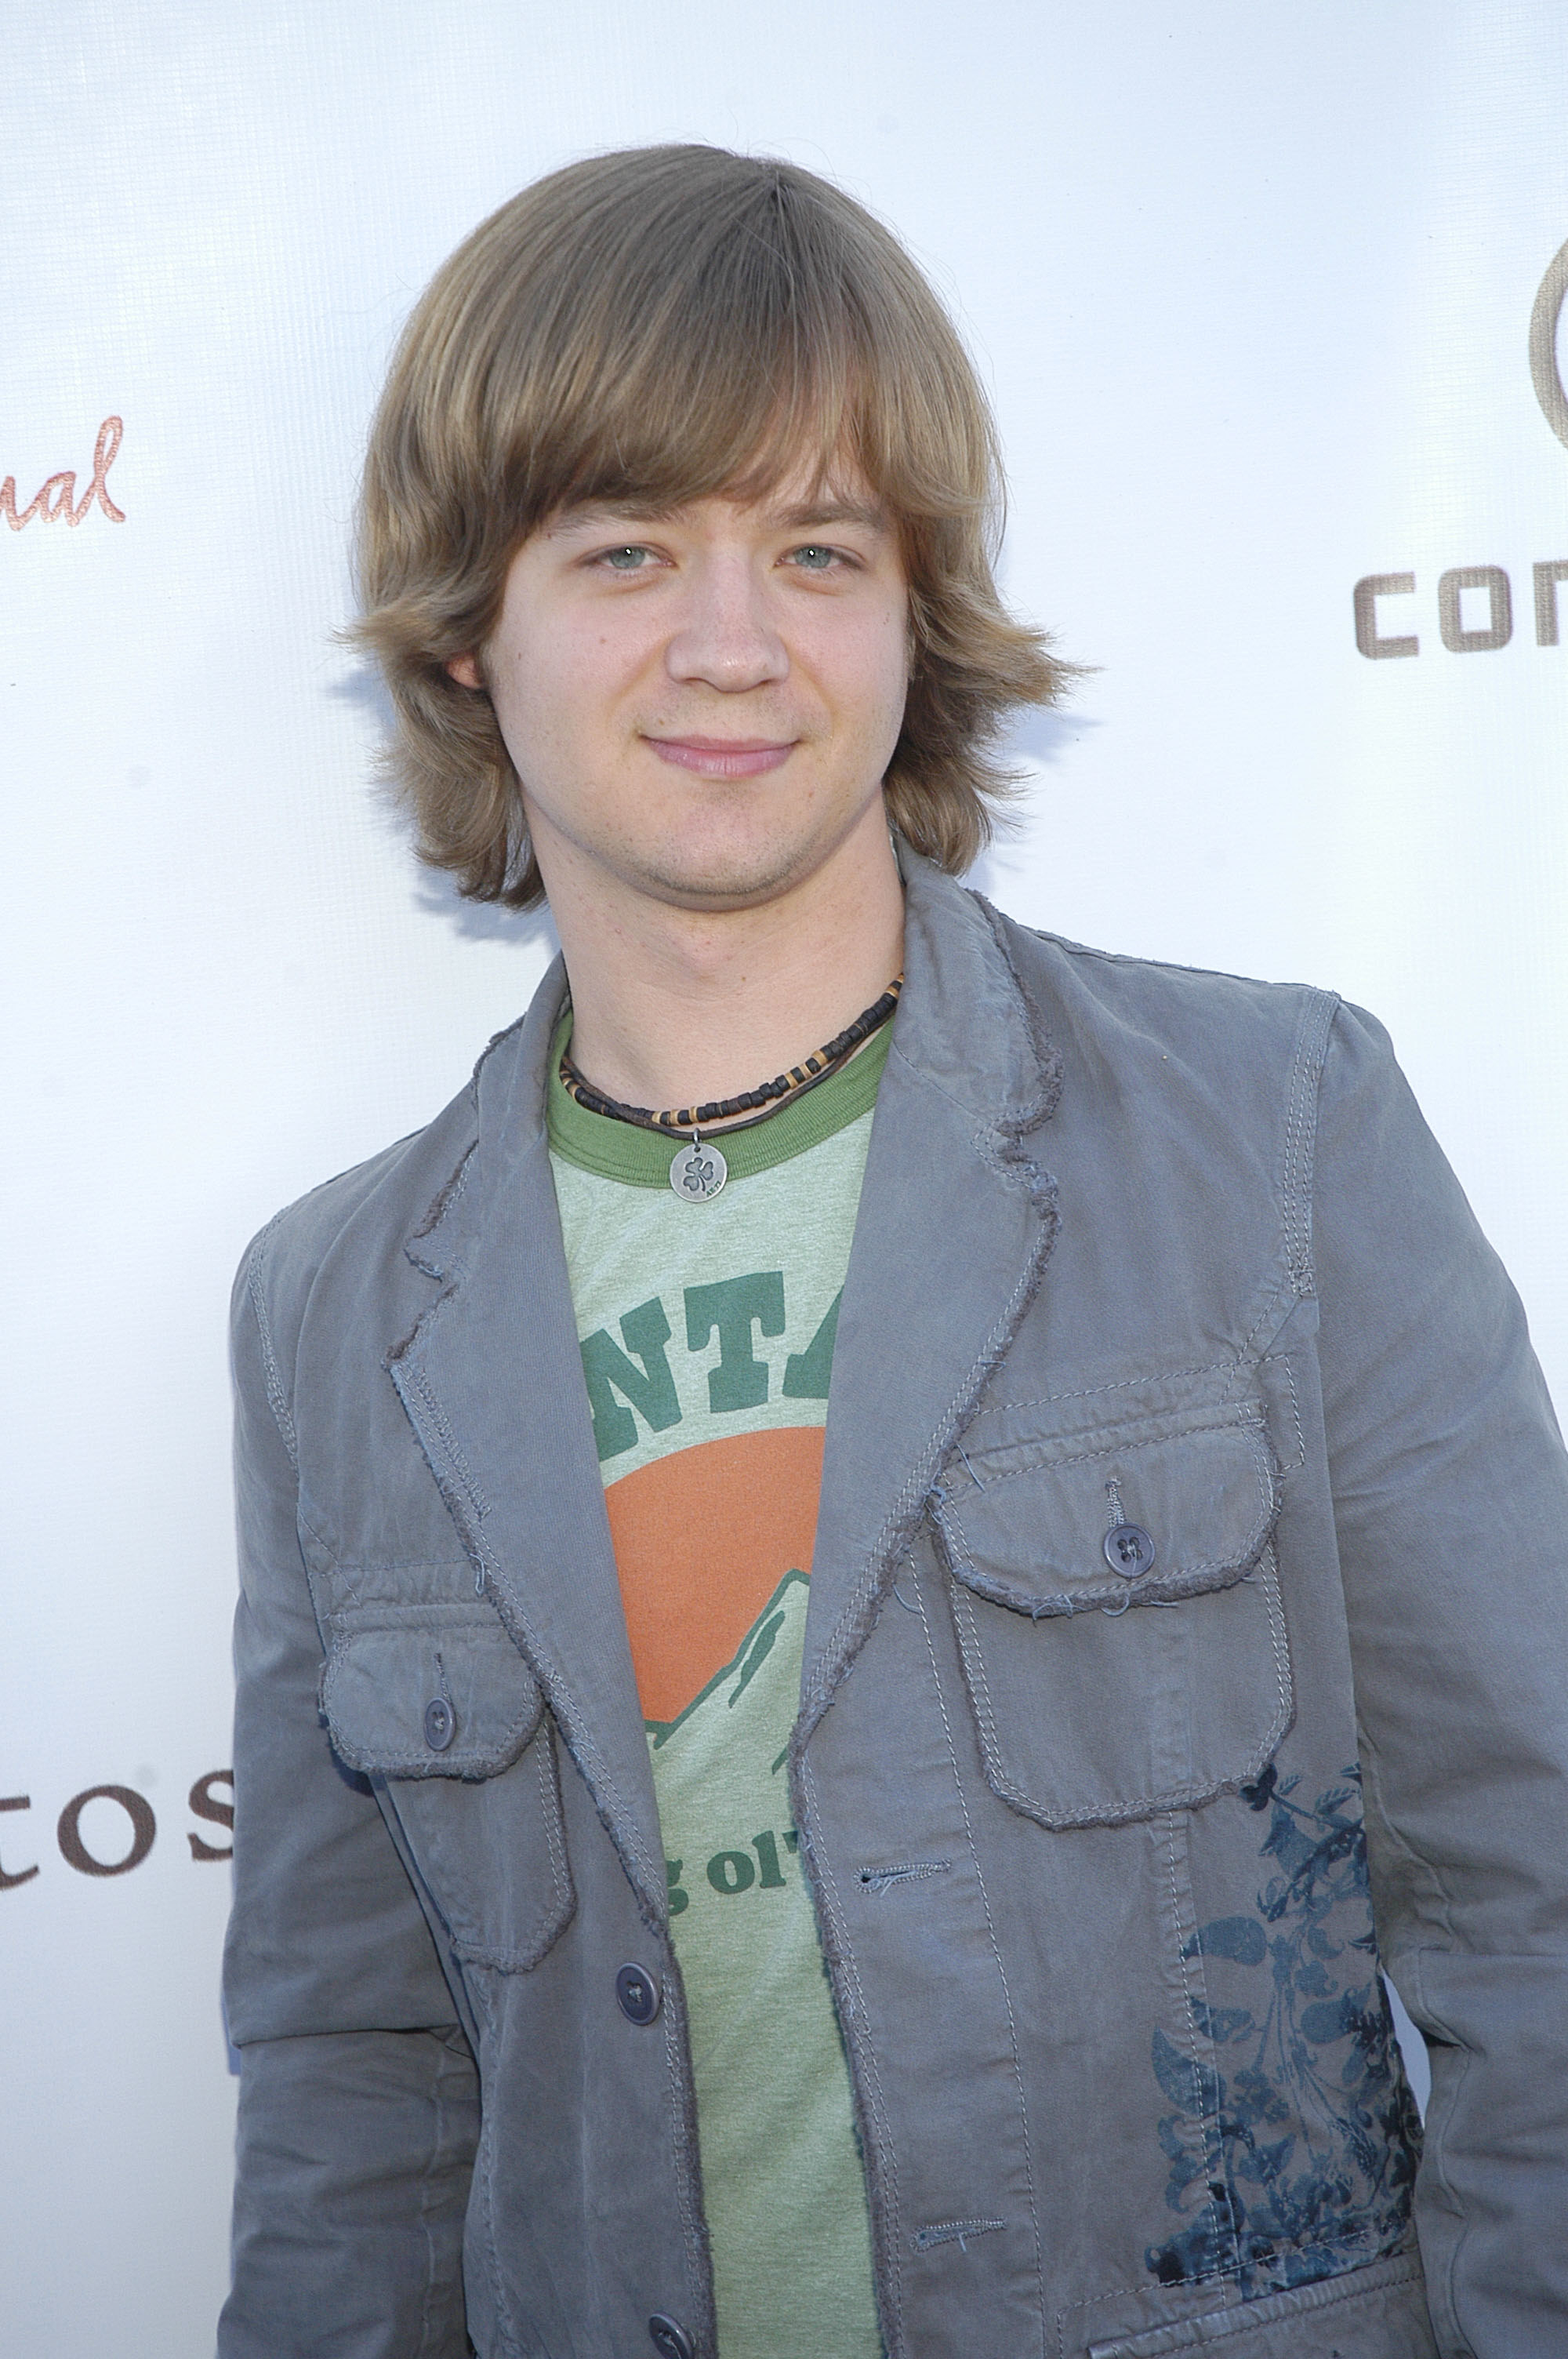 Jason Earles at an event in 2007